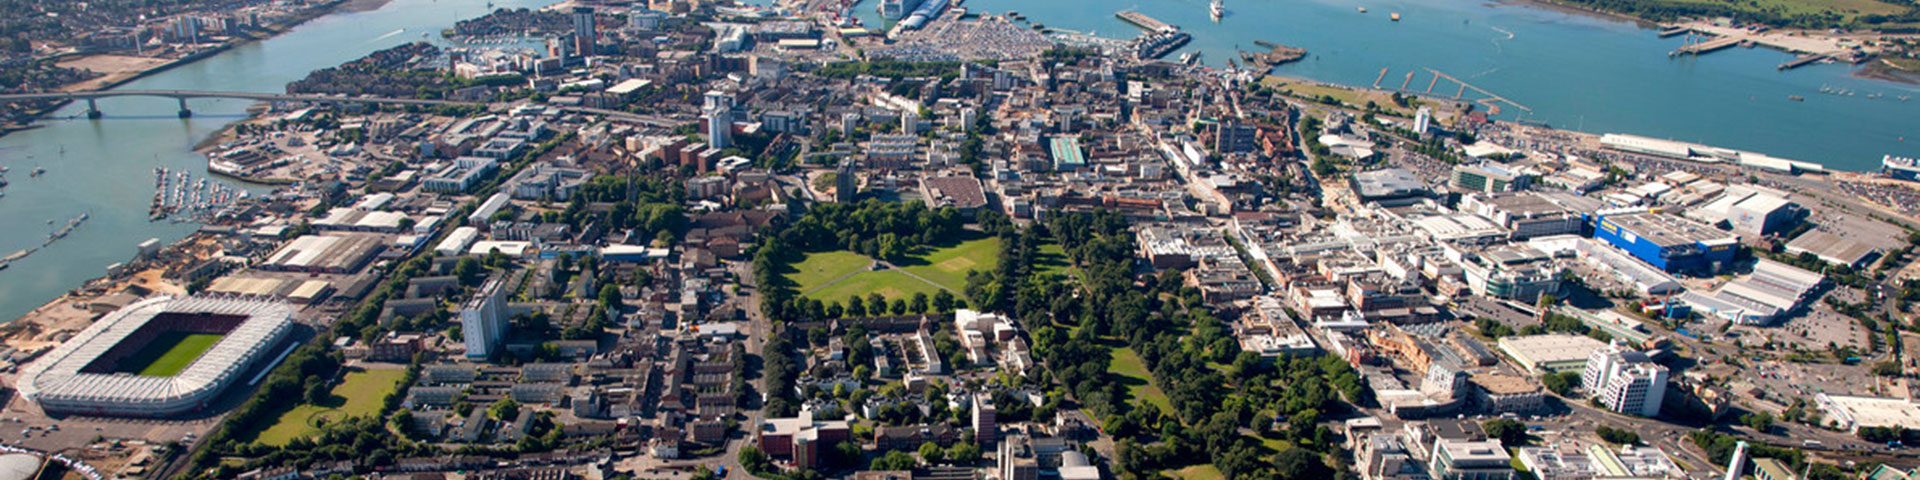 A shot of Southampton from the air.